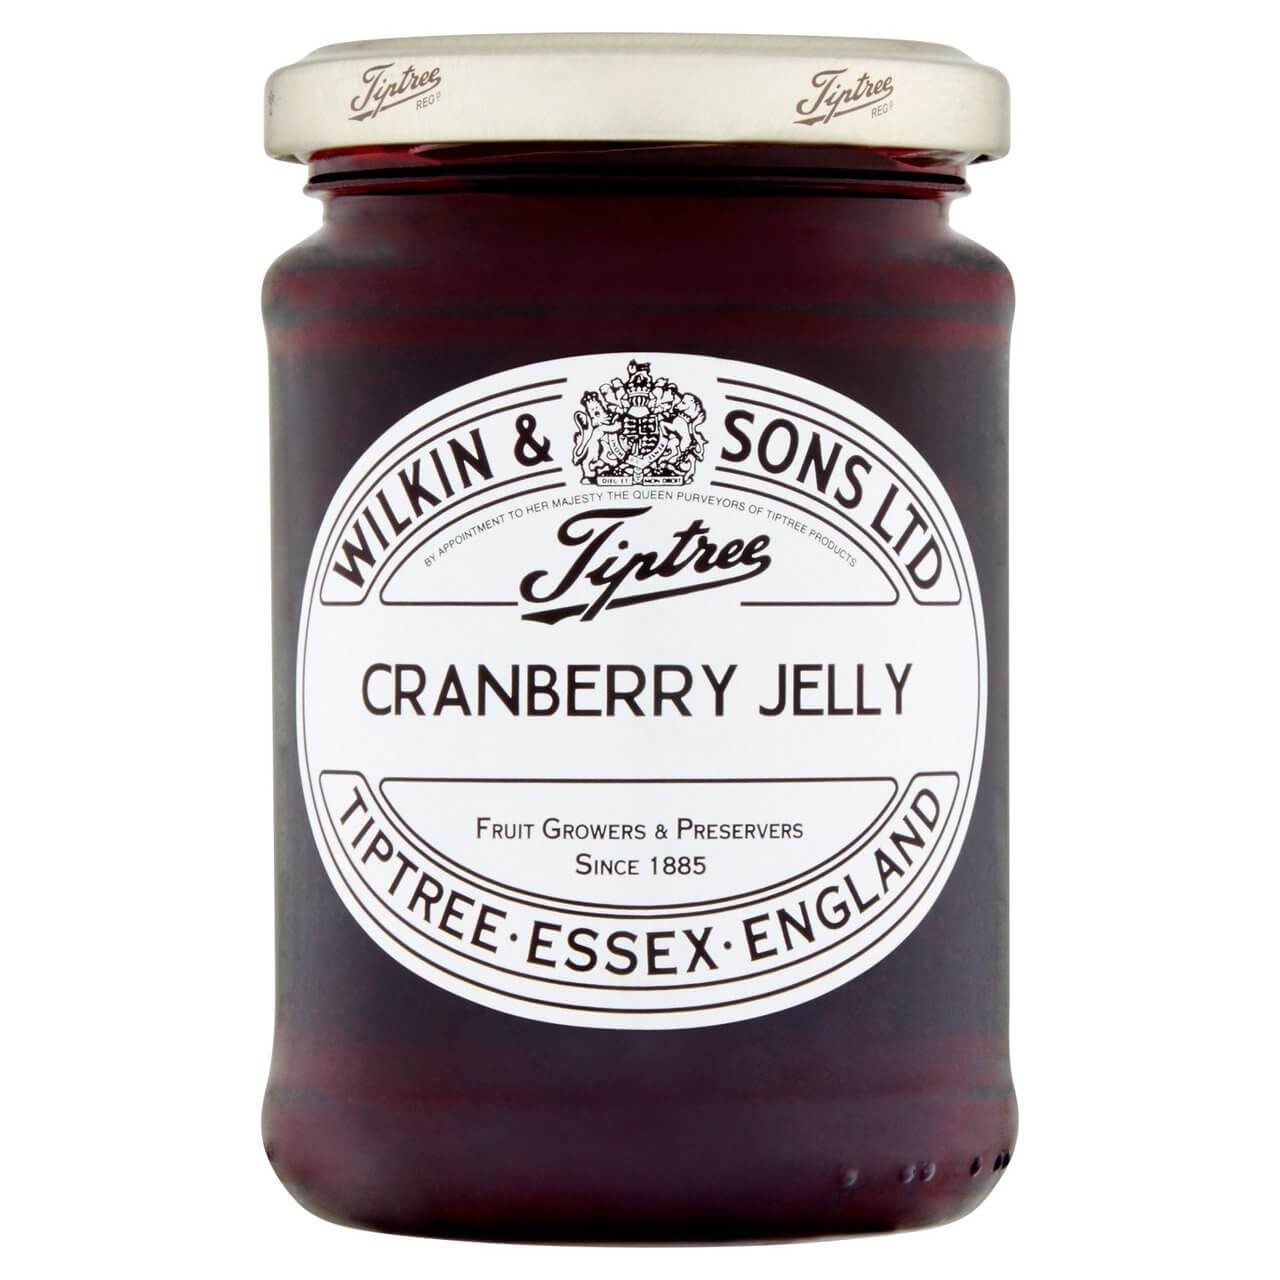 Image of Tiptree Cranberry Jelly made in the UK by Wilkin & Sons. Buying this product supports a UK business, jobs and the local community